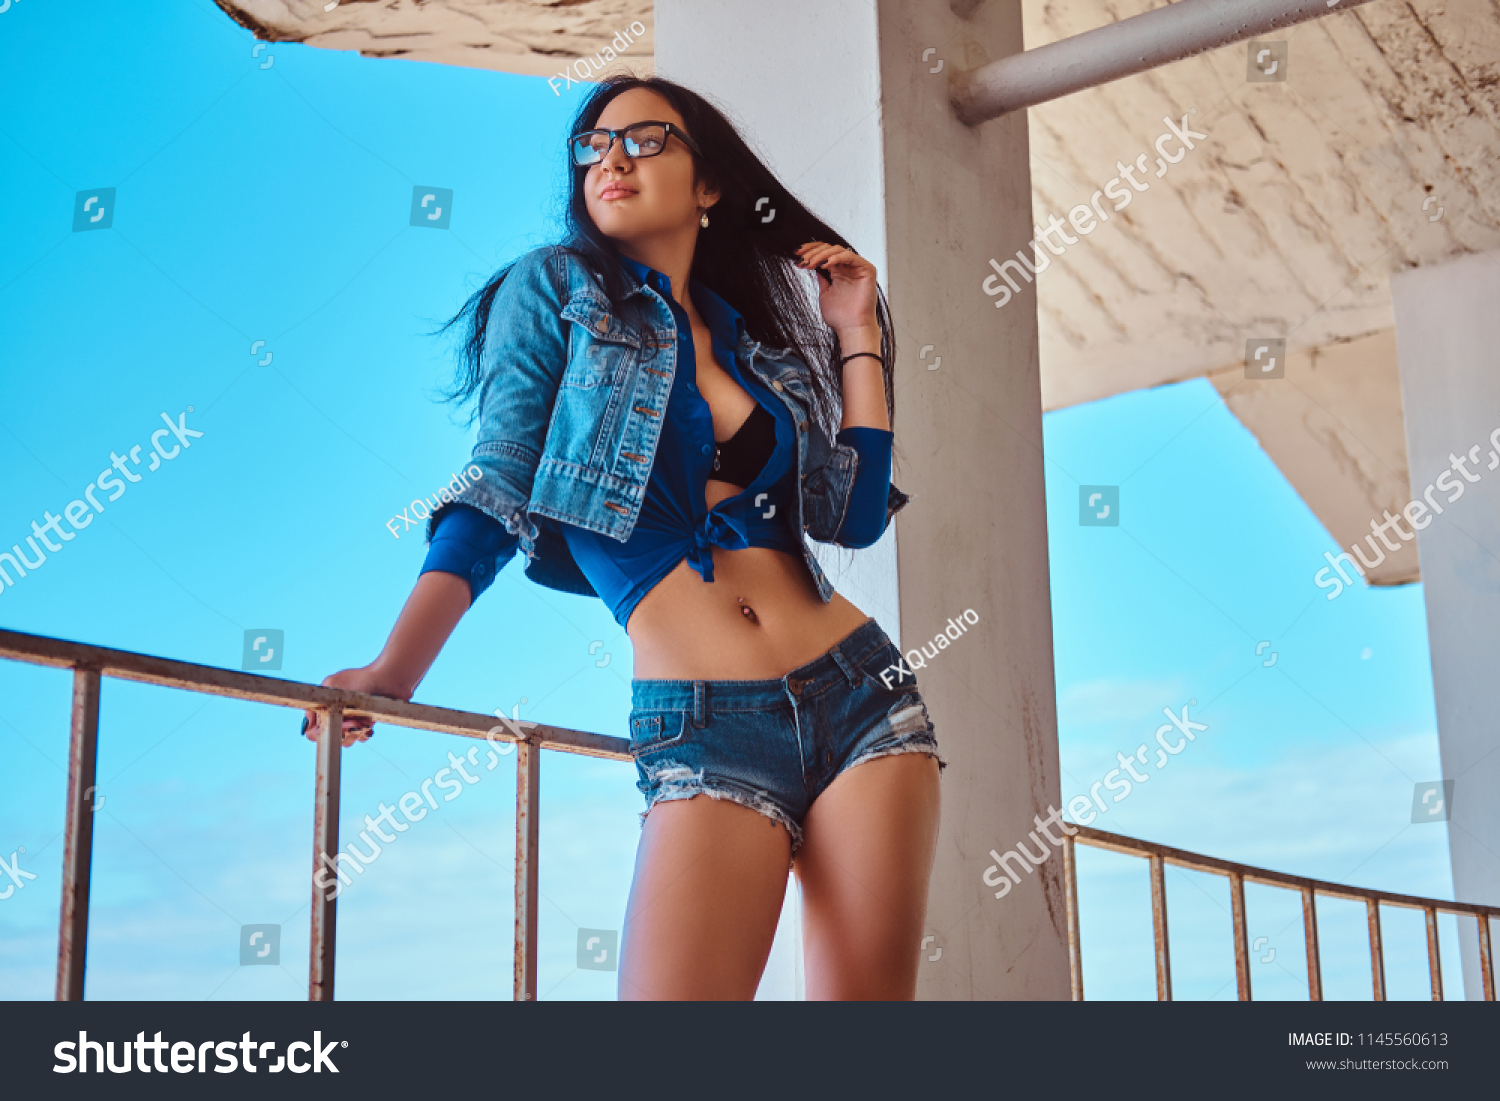 Hot girls being sexy and seductive Seductive Sexy Brunette Girl Wearing Short Stock Photo Edit Now 1145560613